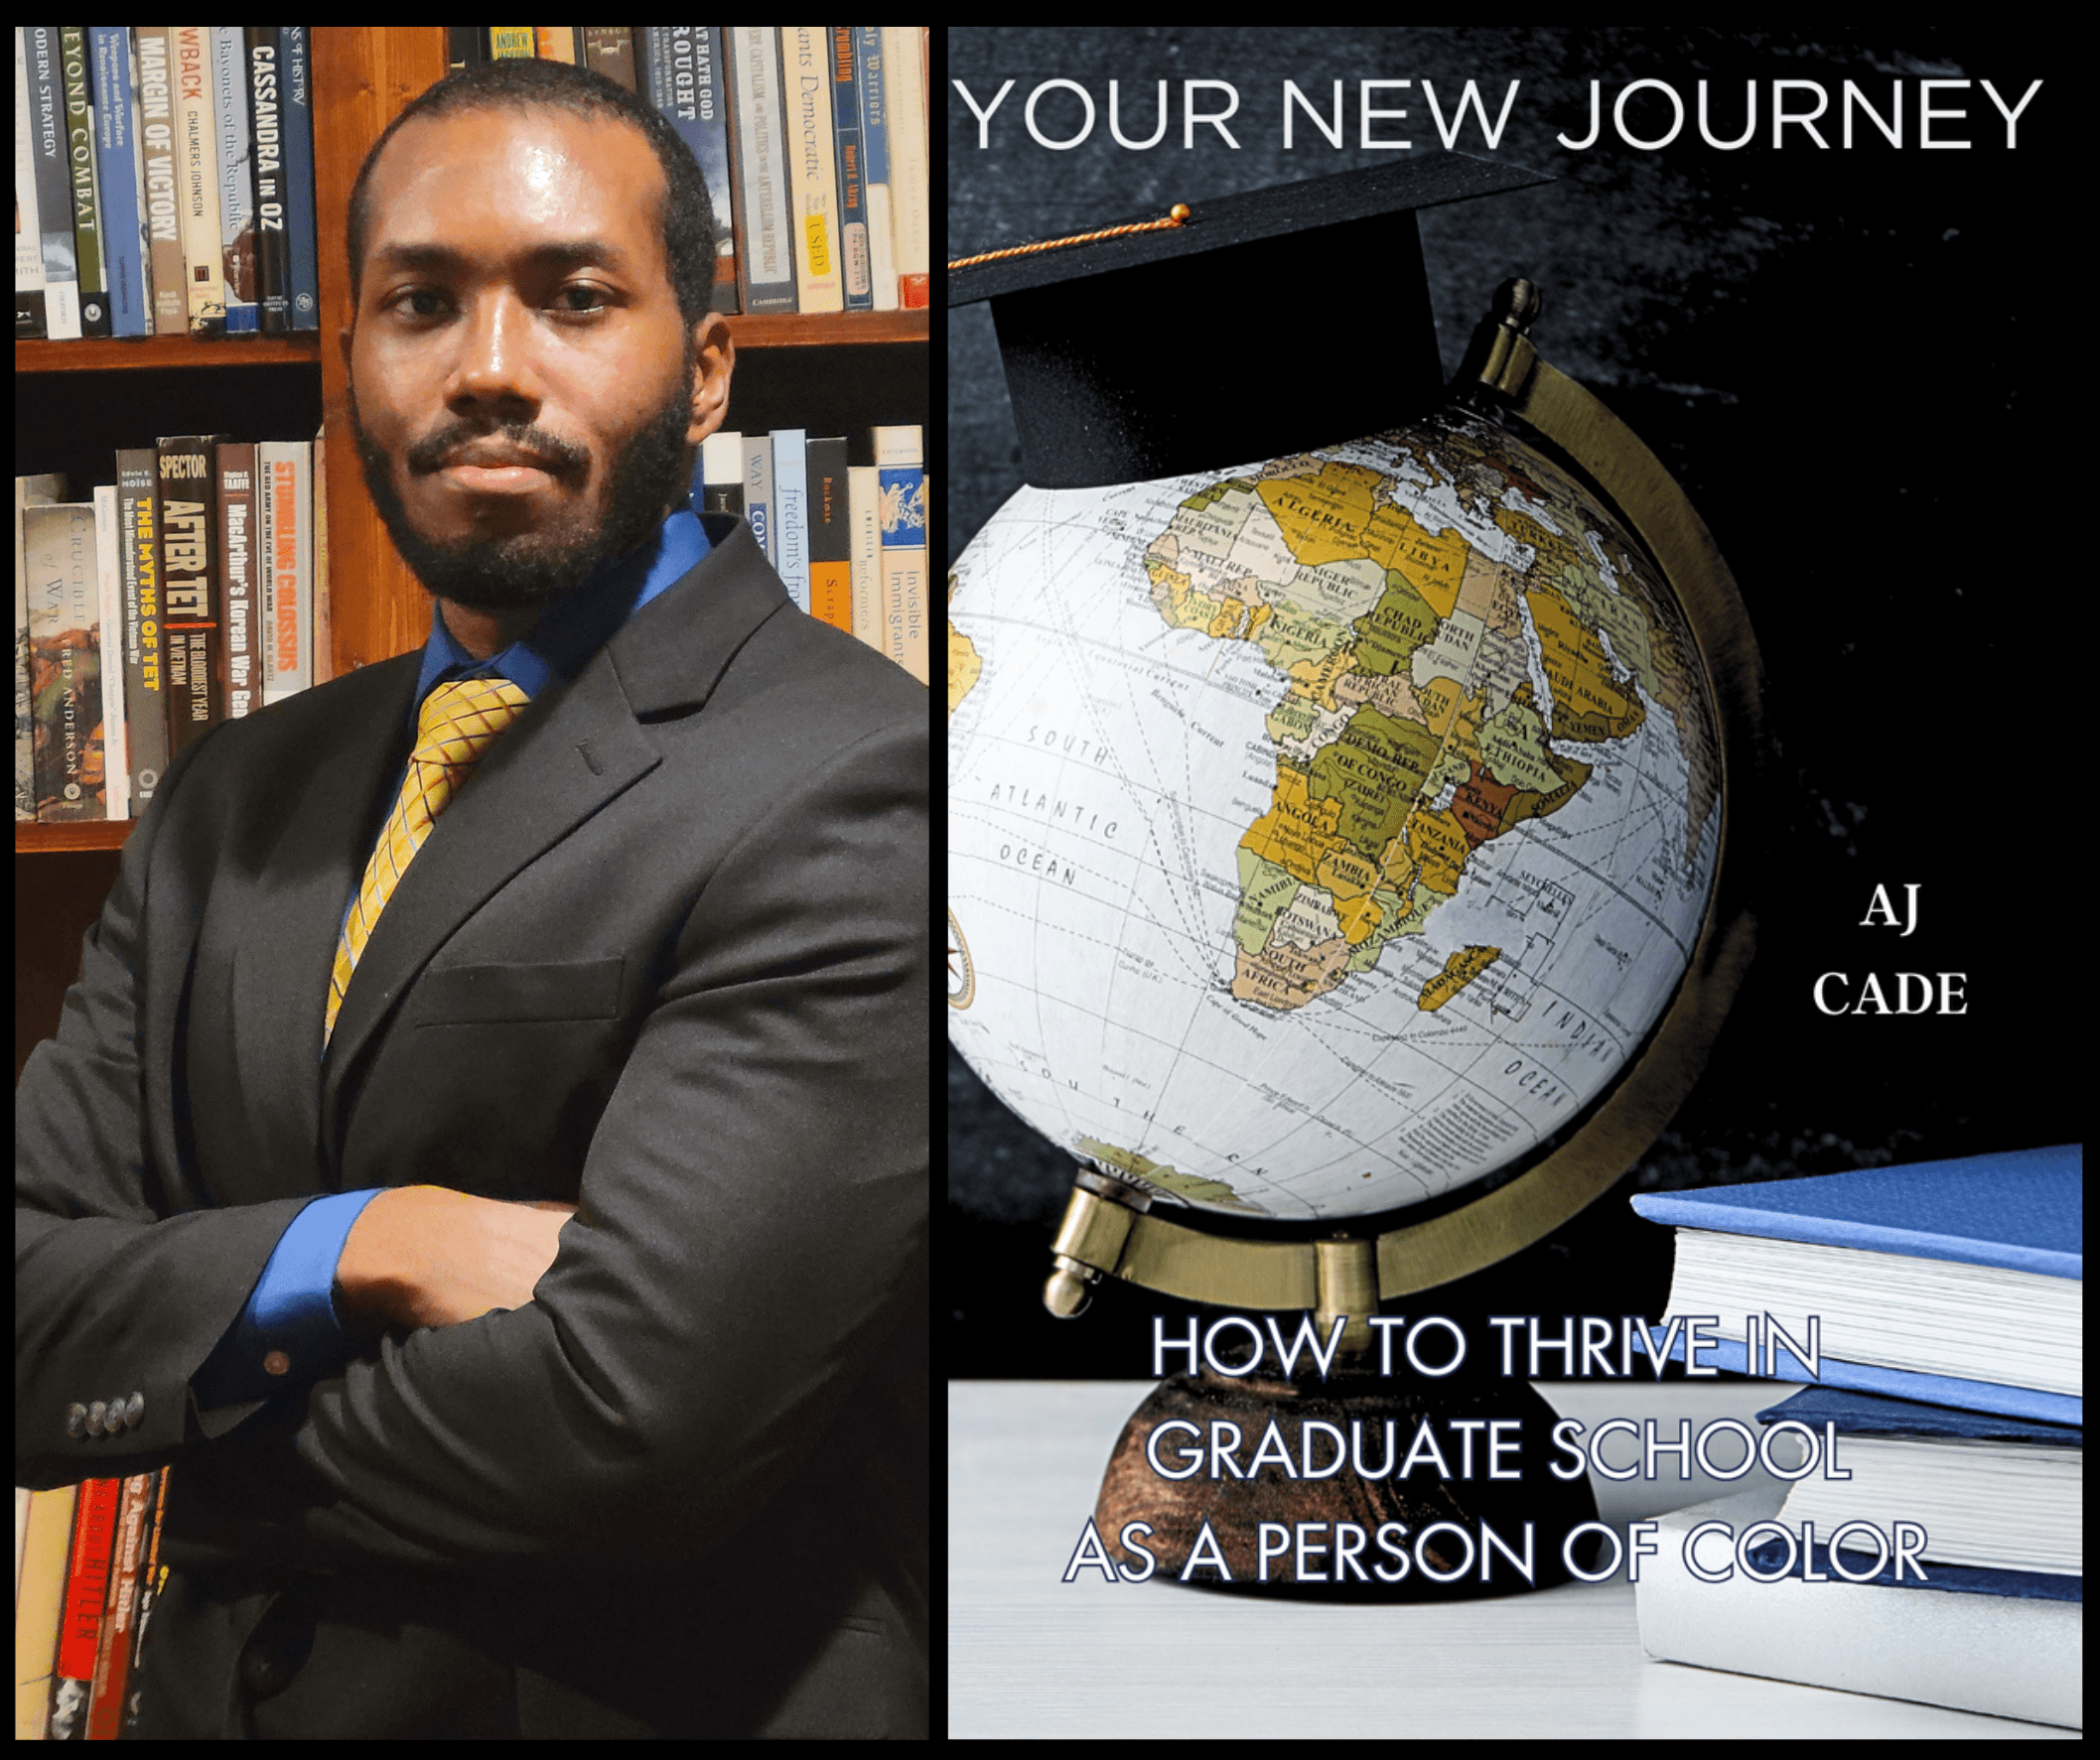 AJ Cade '17 and his new book 'Your New Journey'